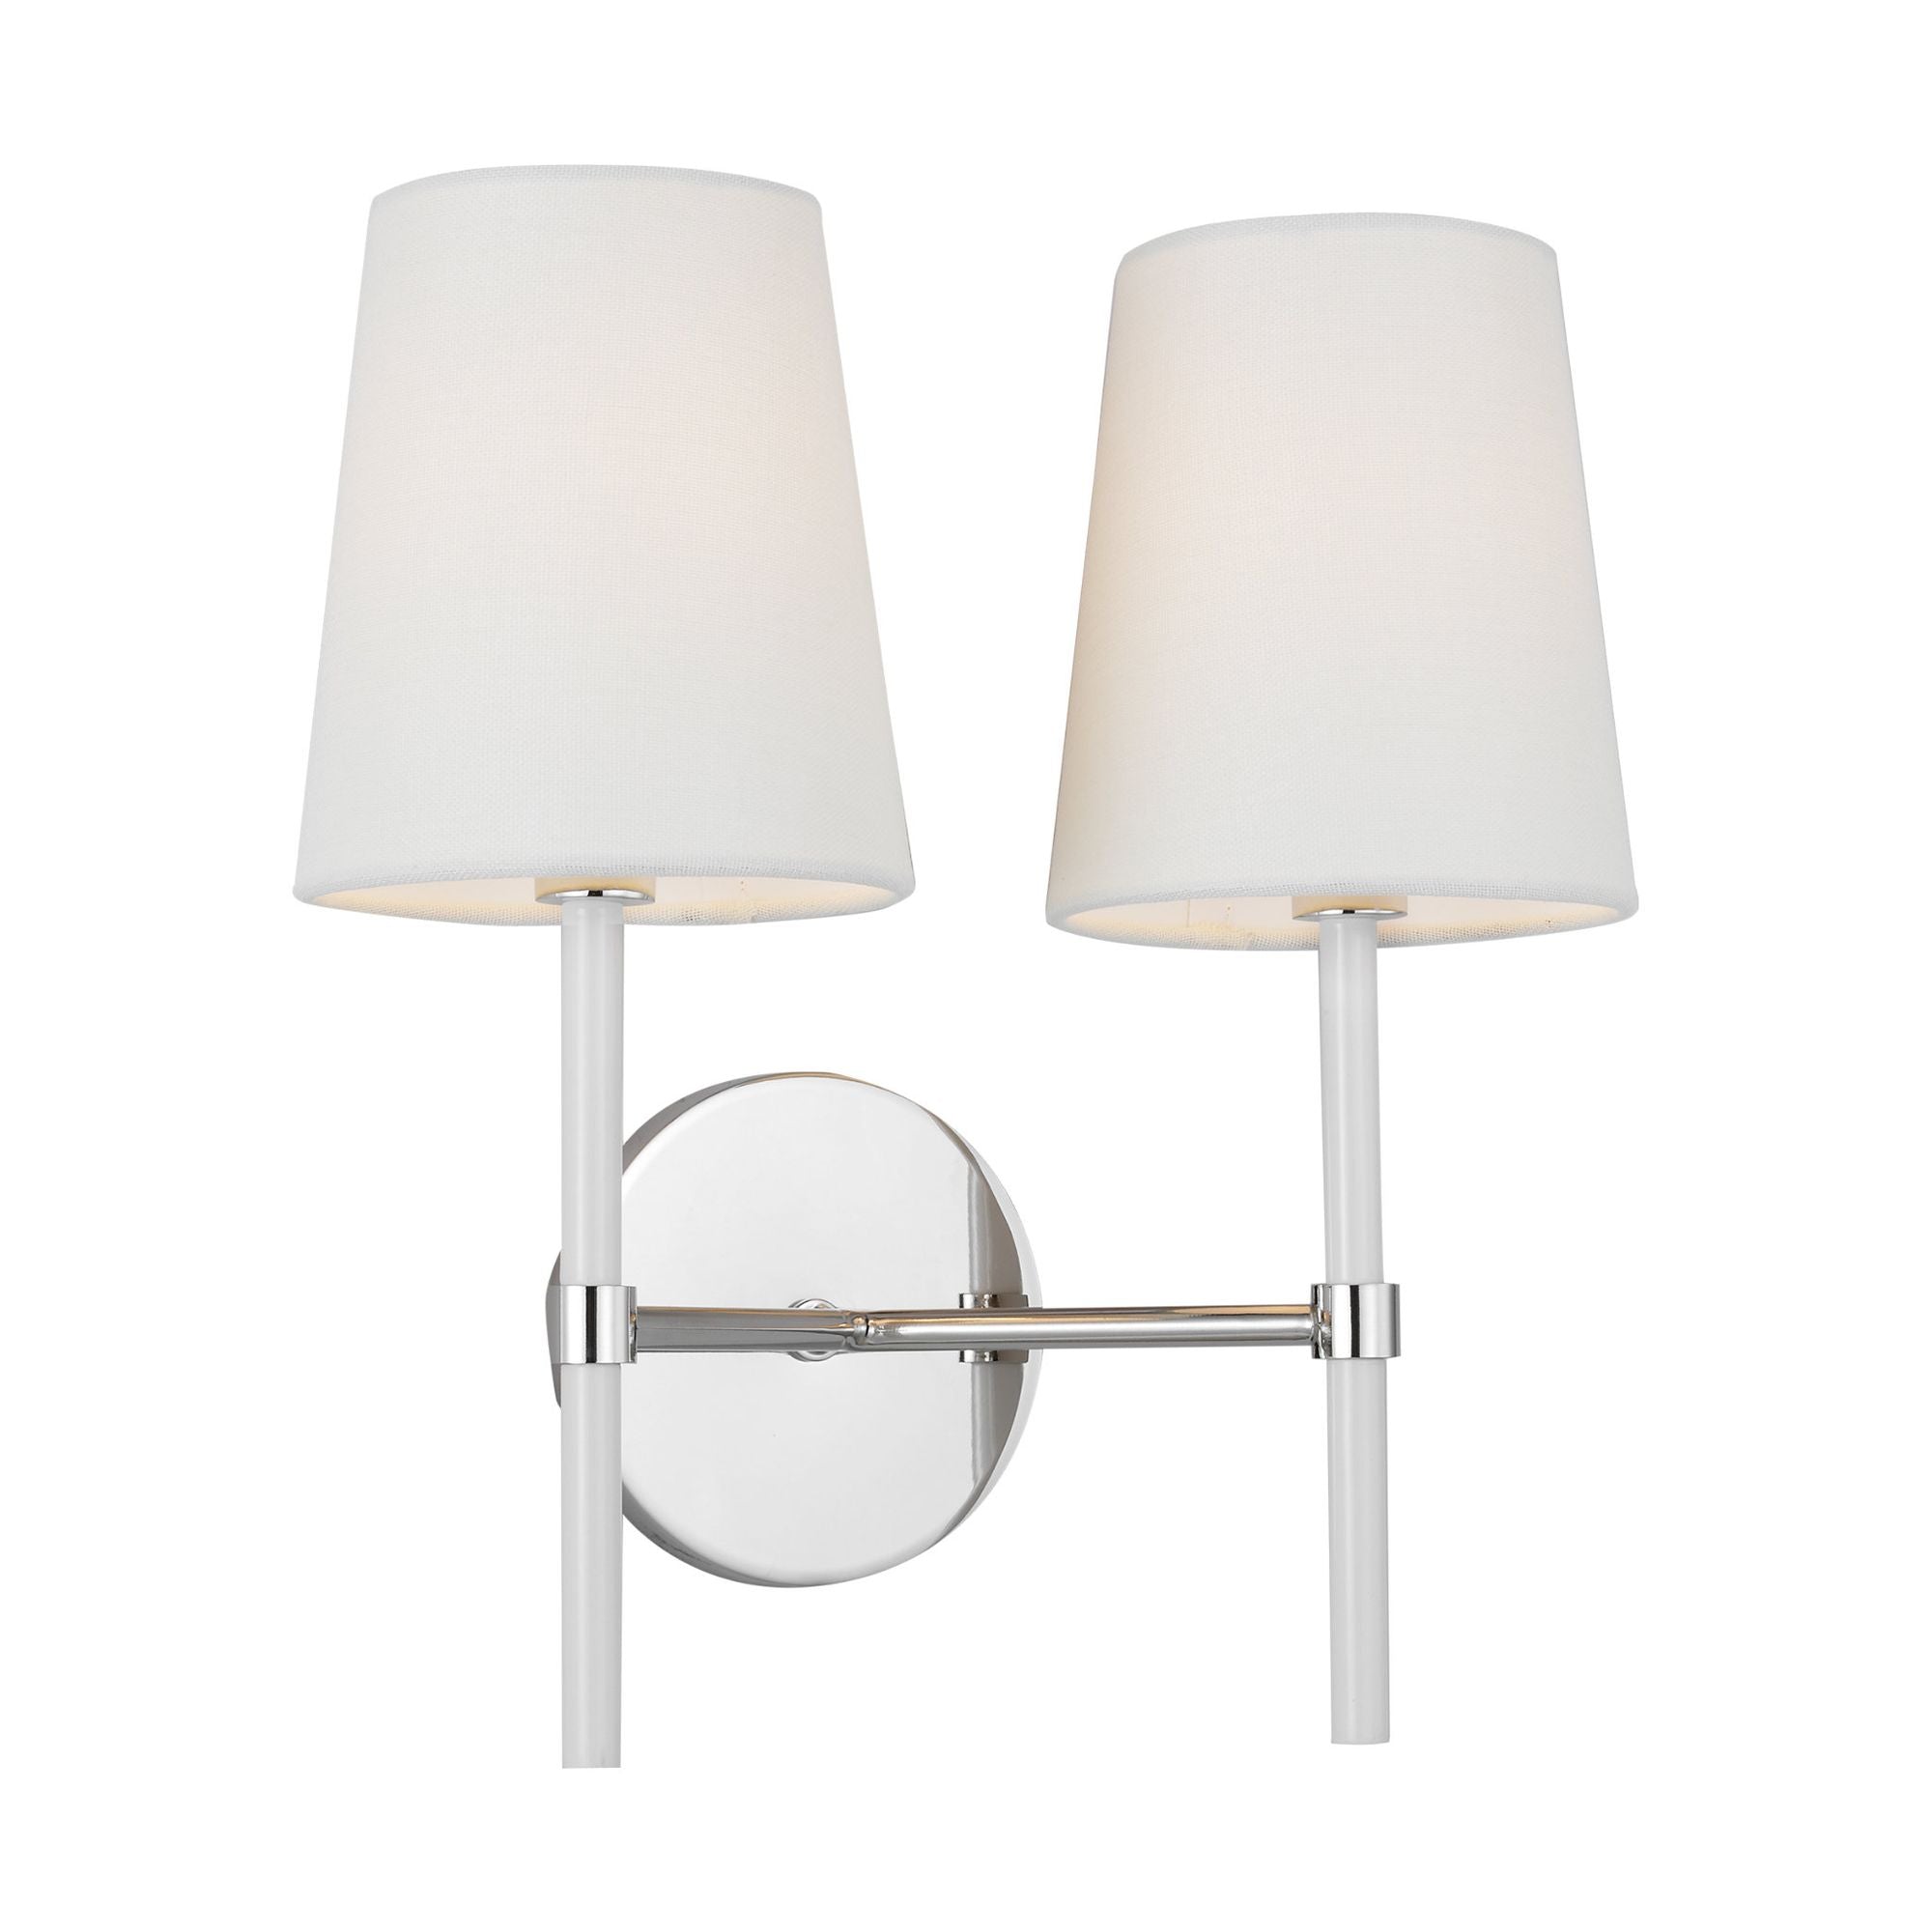 kate spade new york Monroe Double Sconce in Polished Nickel